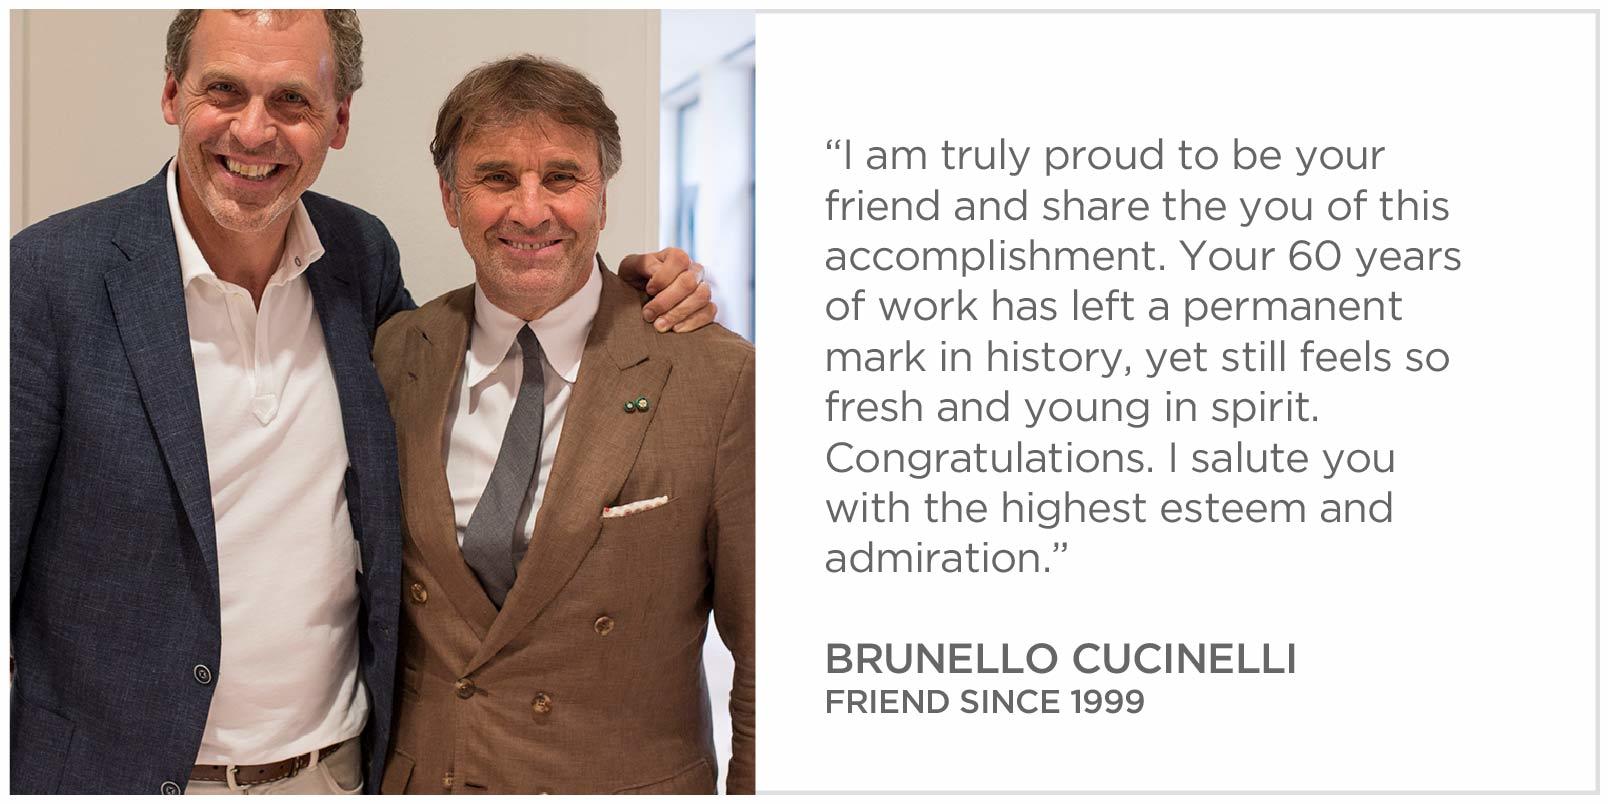 I am truly proud to be your friend and share the you of this accomplishment. Your 60 years of work has left a permanent mark in history, yet still feels so fresh and young in spirit. Congratulations. I salute you with the highest esteem Brunello Cucinelli